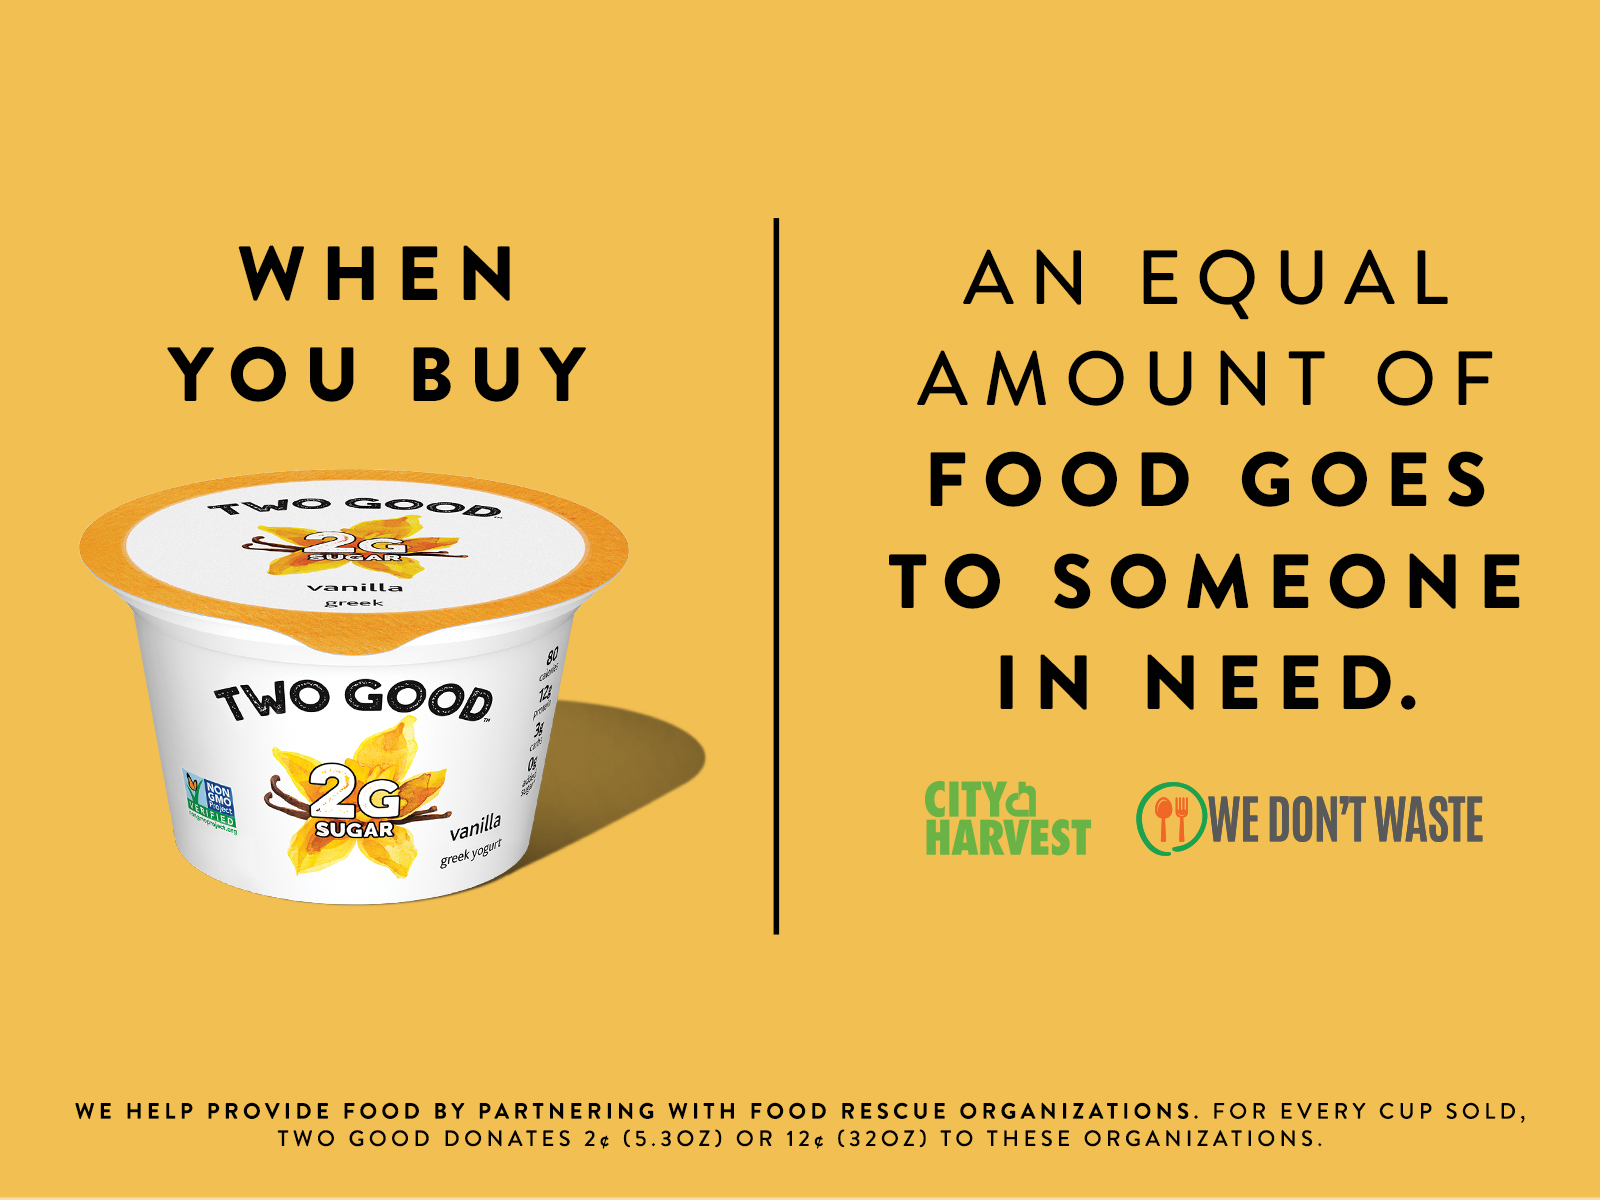 Save On Two Good Yogurt At Publix – Get Great Taste & Give To Someone In Need